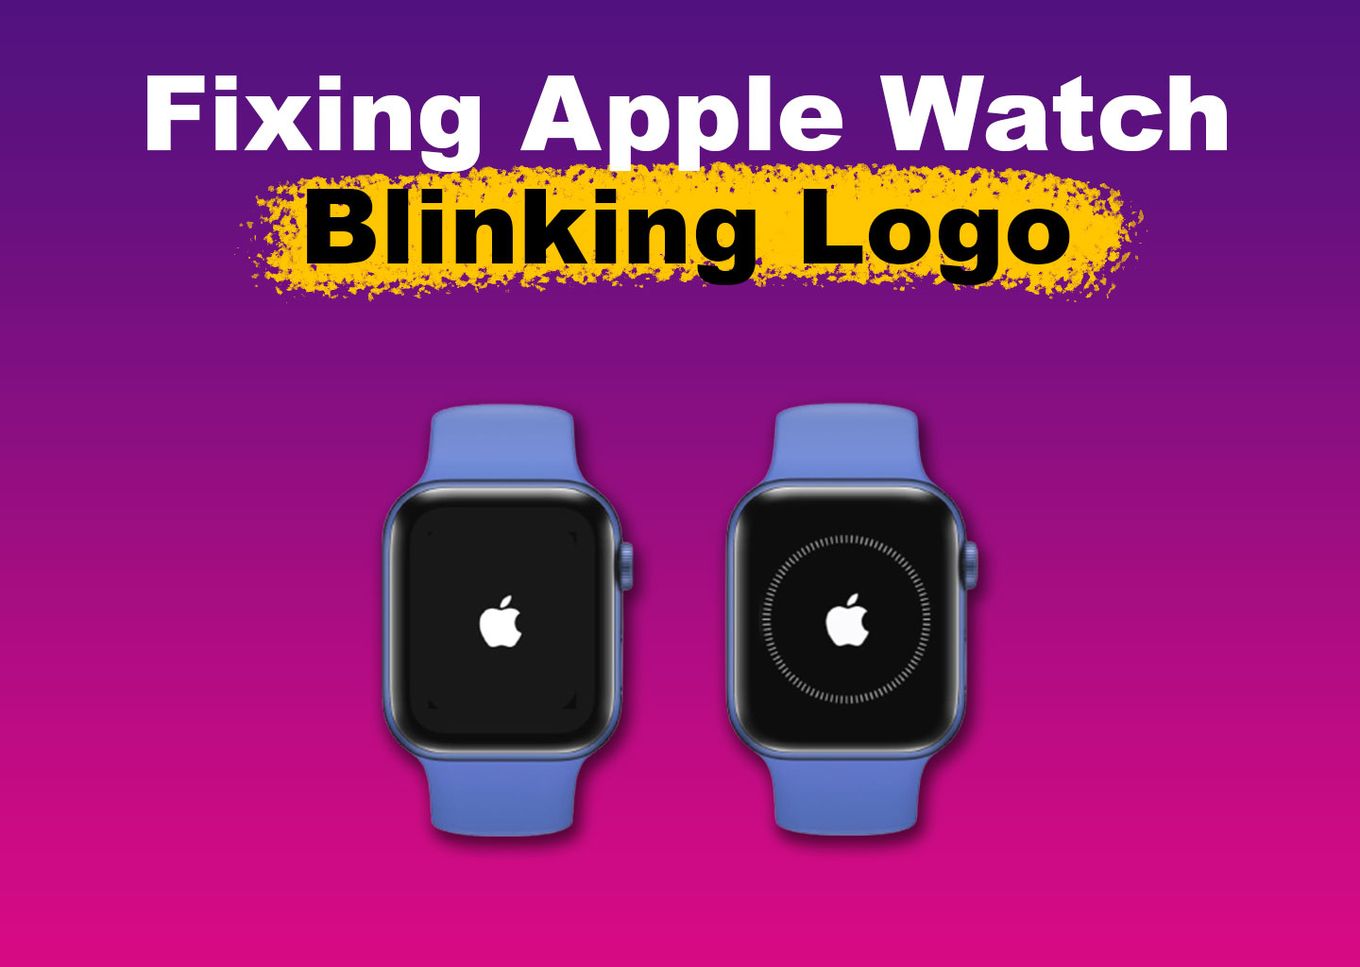 Is Your Apple Watch Side Button Stuck or Unresponsive? Try These Fixes